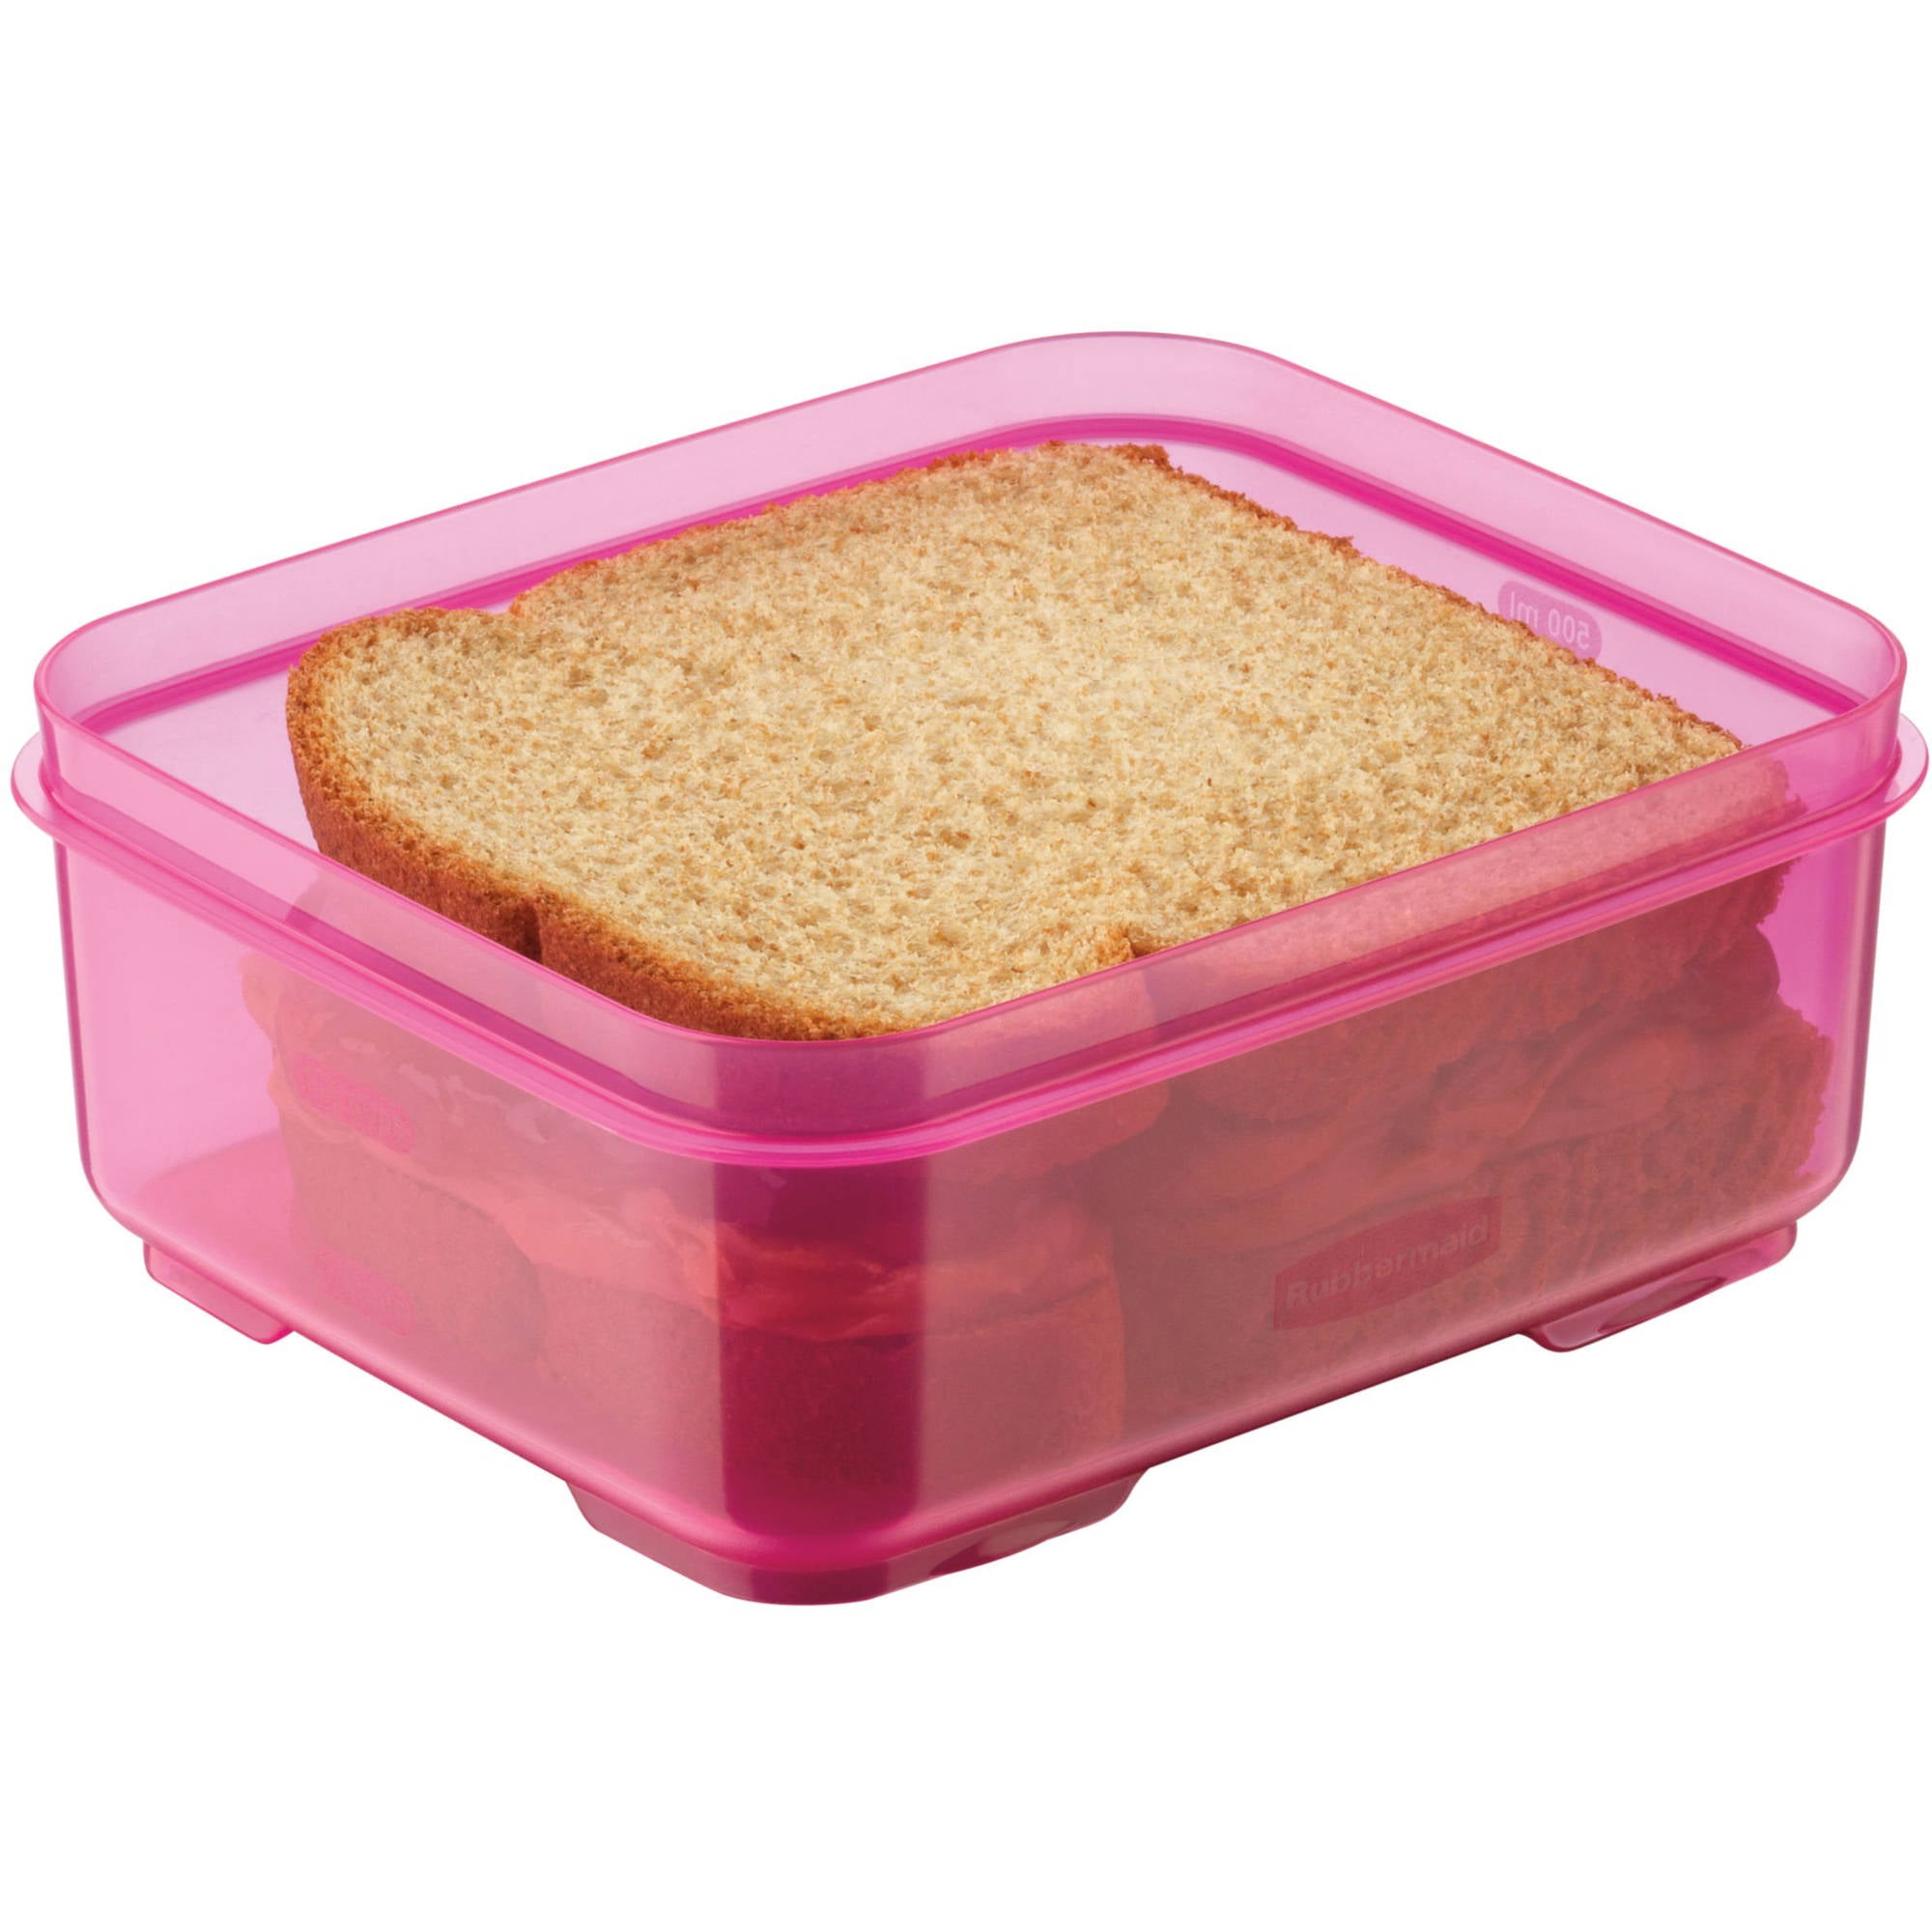 Rubbermaid 4-Piece Snap and Stack Lunch Blox Kit with Ice, Multi,  5.25x5x4.5 Inches - multi - Bed Bath & Beyond - 14796224